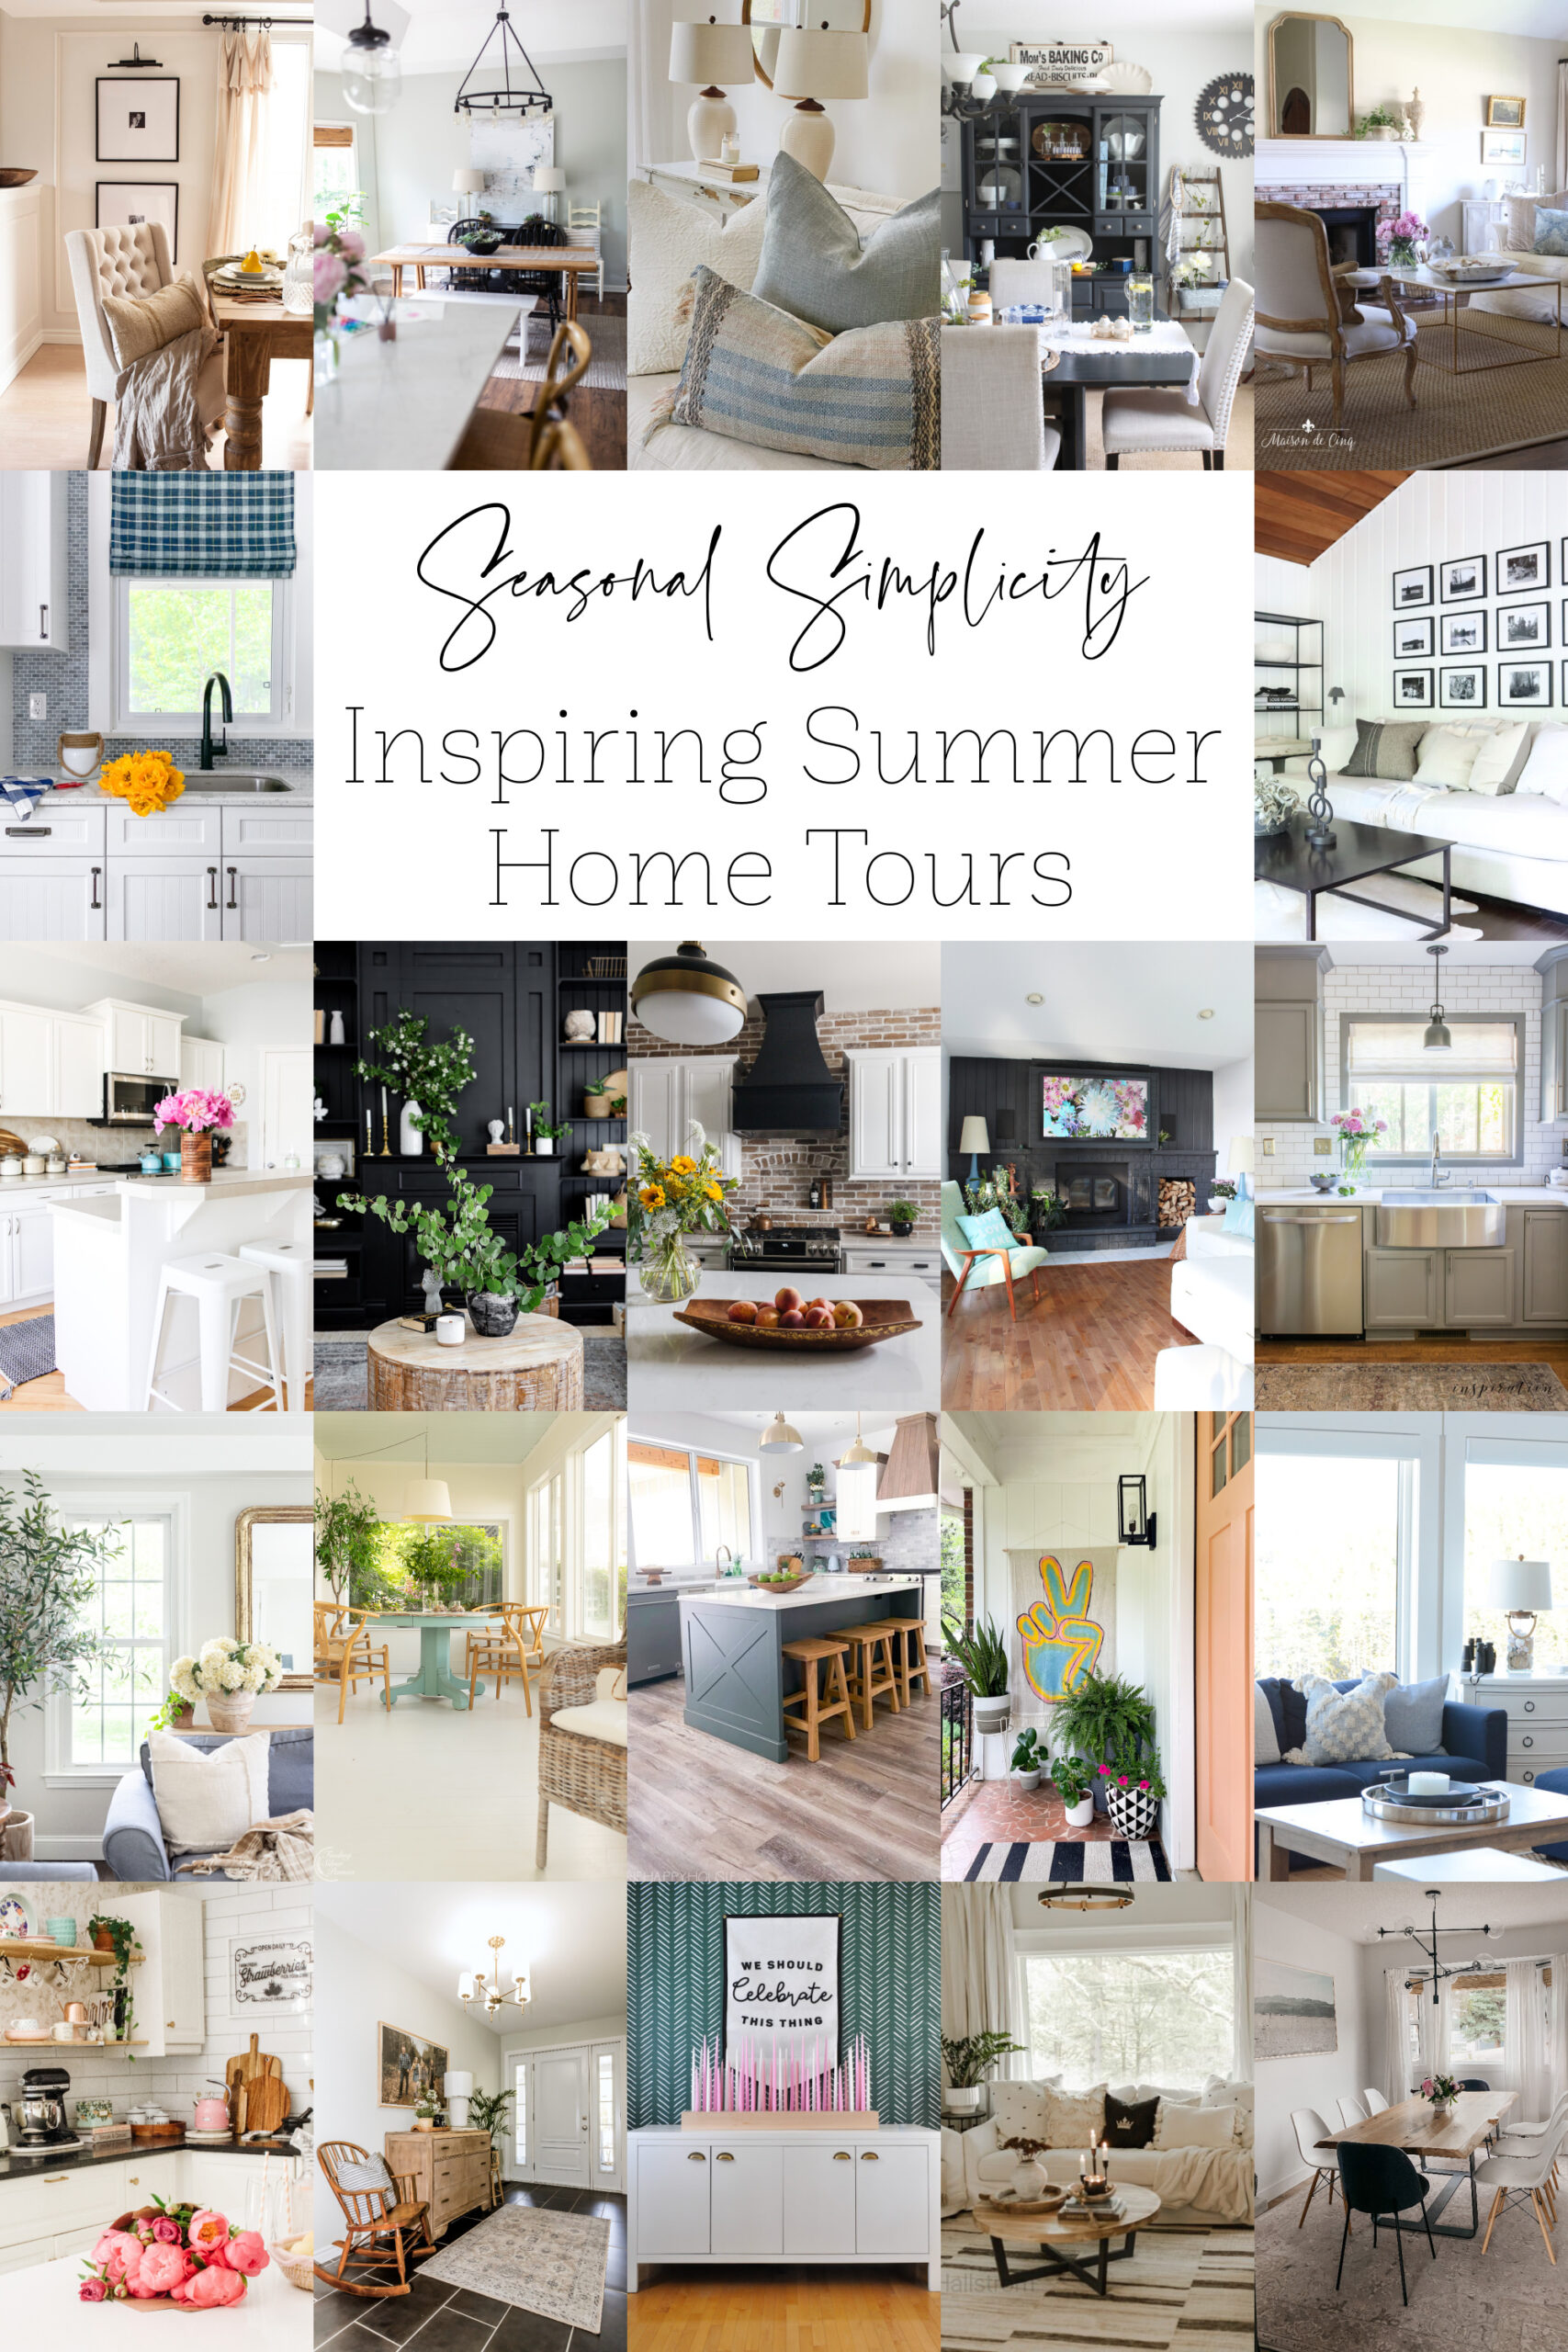 Inspiring Summer Home Tours graphic.